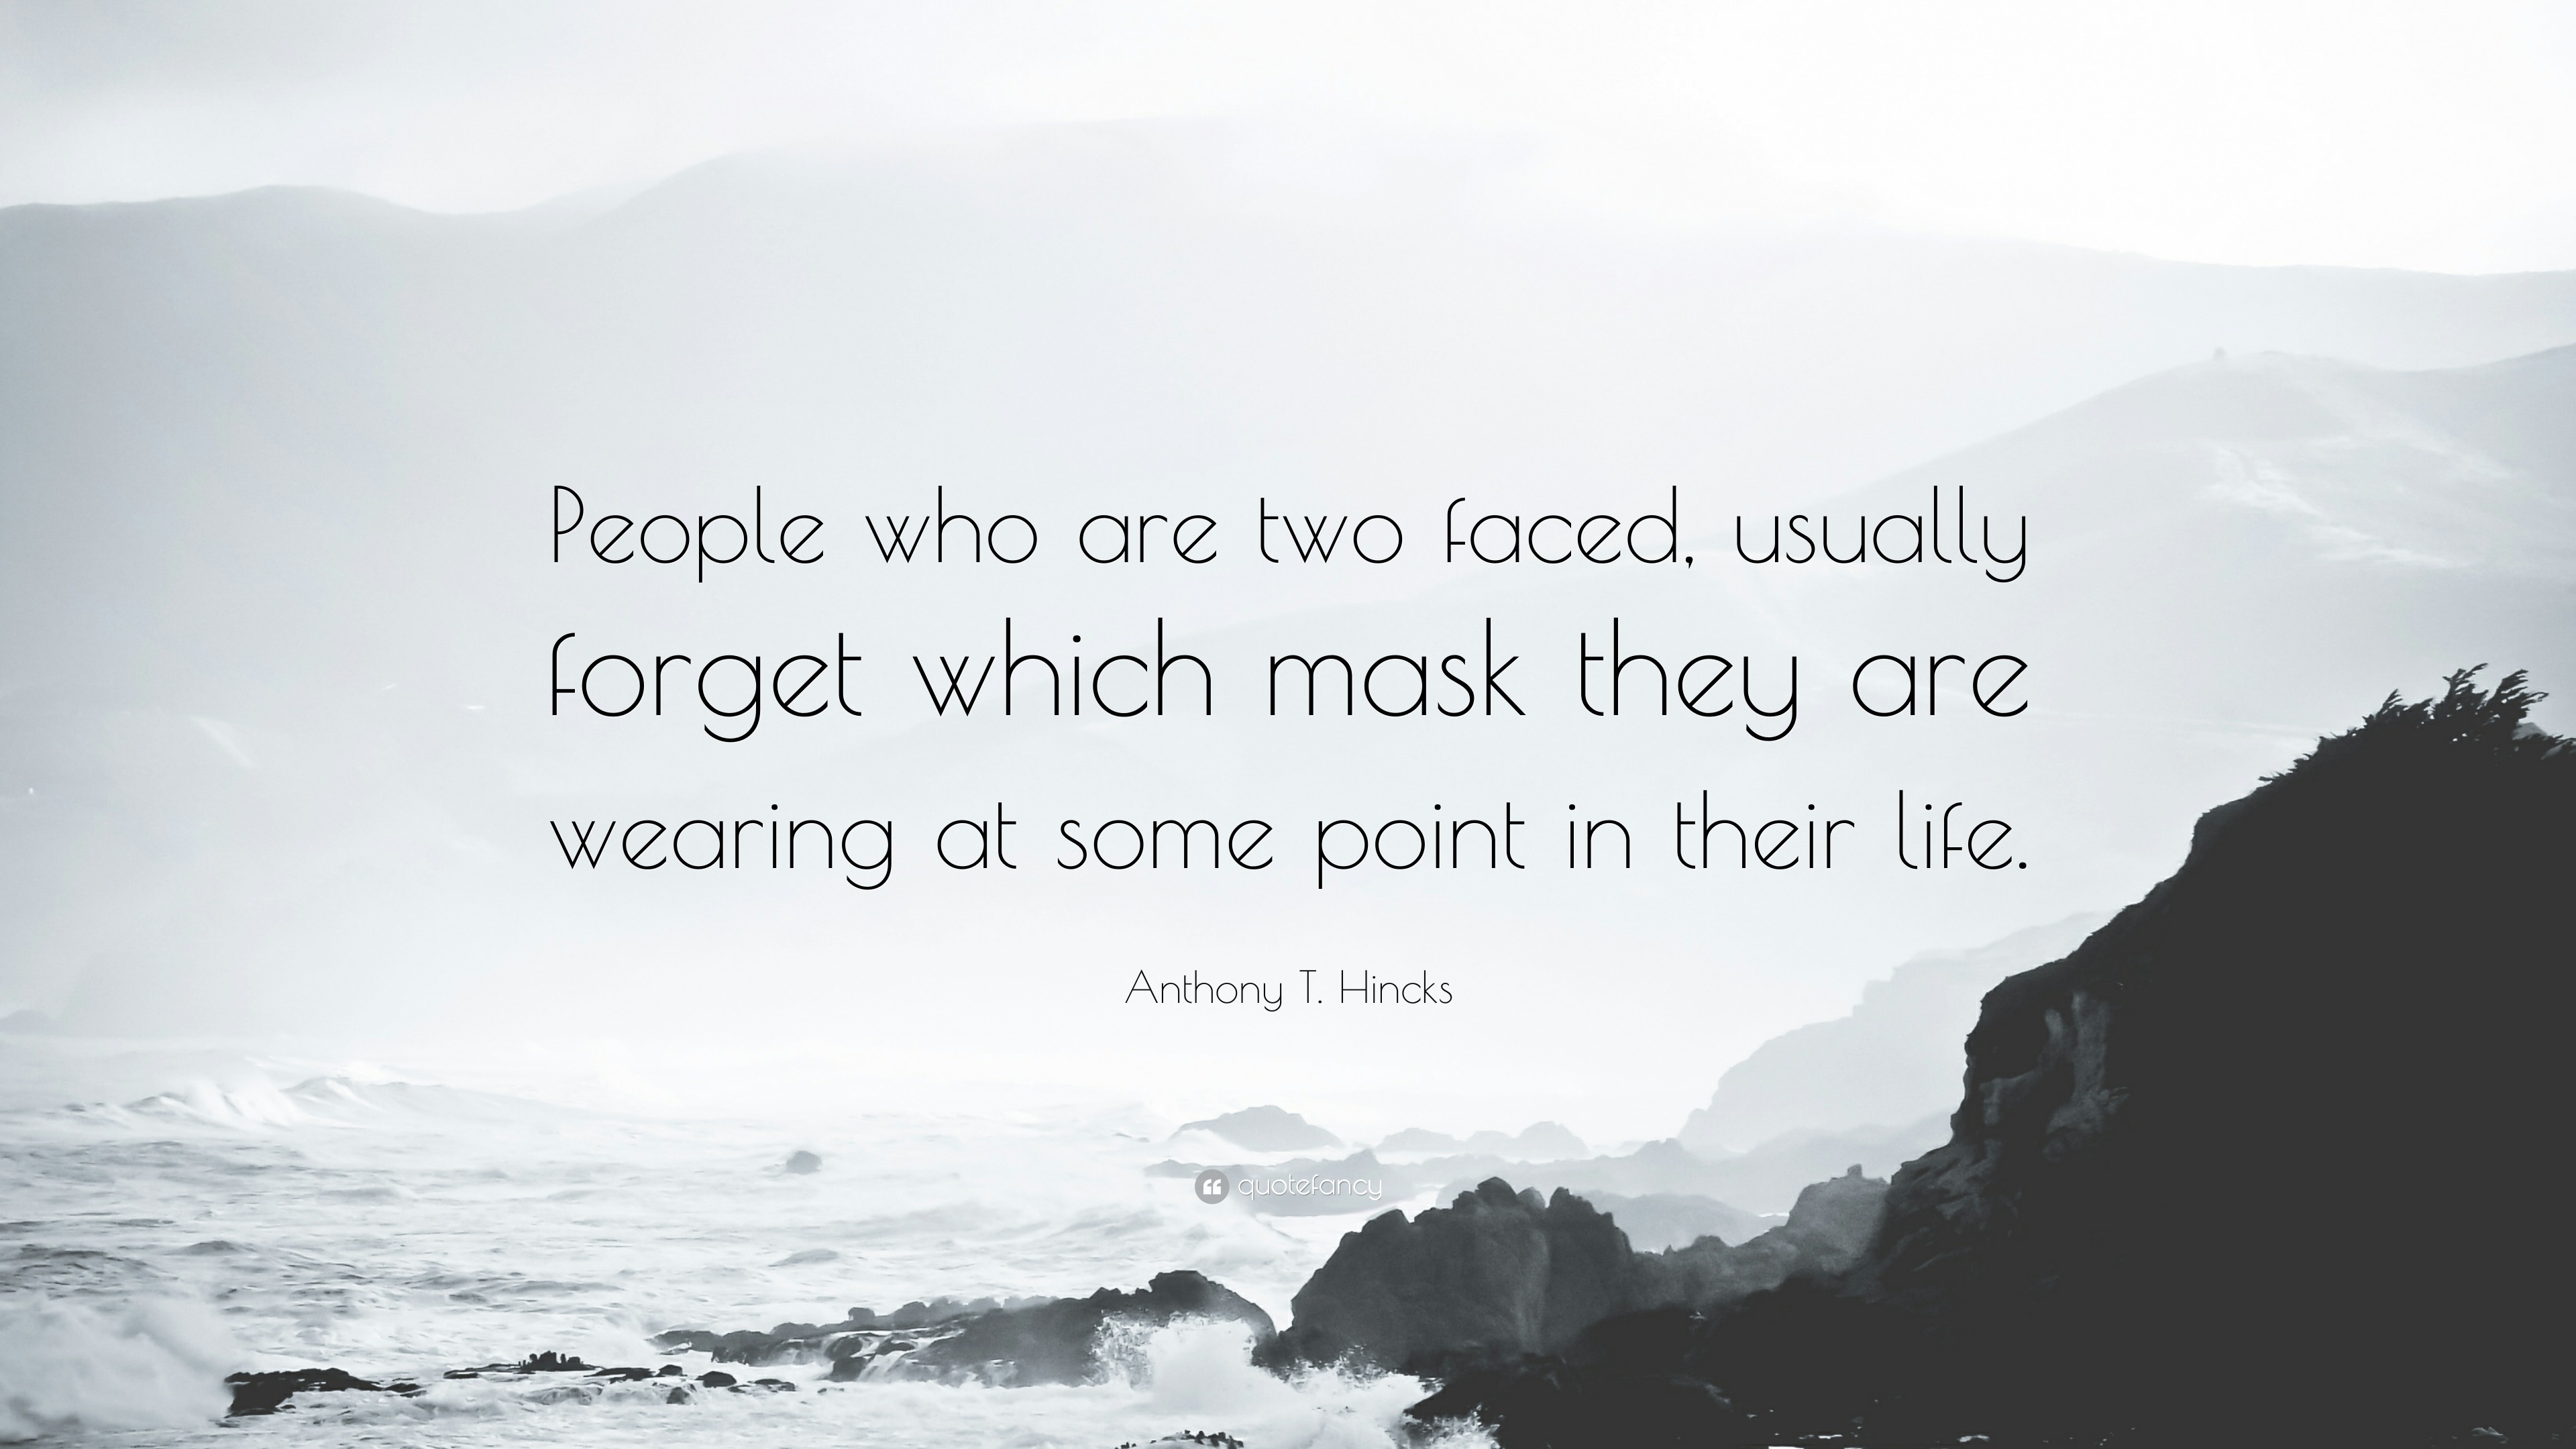 https://quotefancy.com/media/wallpaper/3840x2160/6455506-Anthony-T-Hincks-Quote-People-who-are-two-faced-usually-forget.jpg